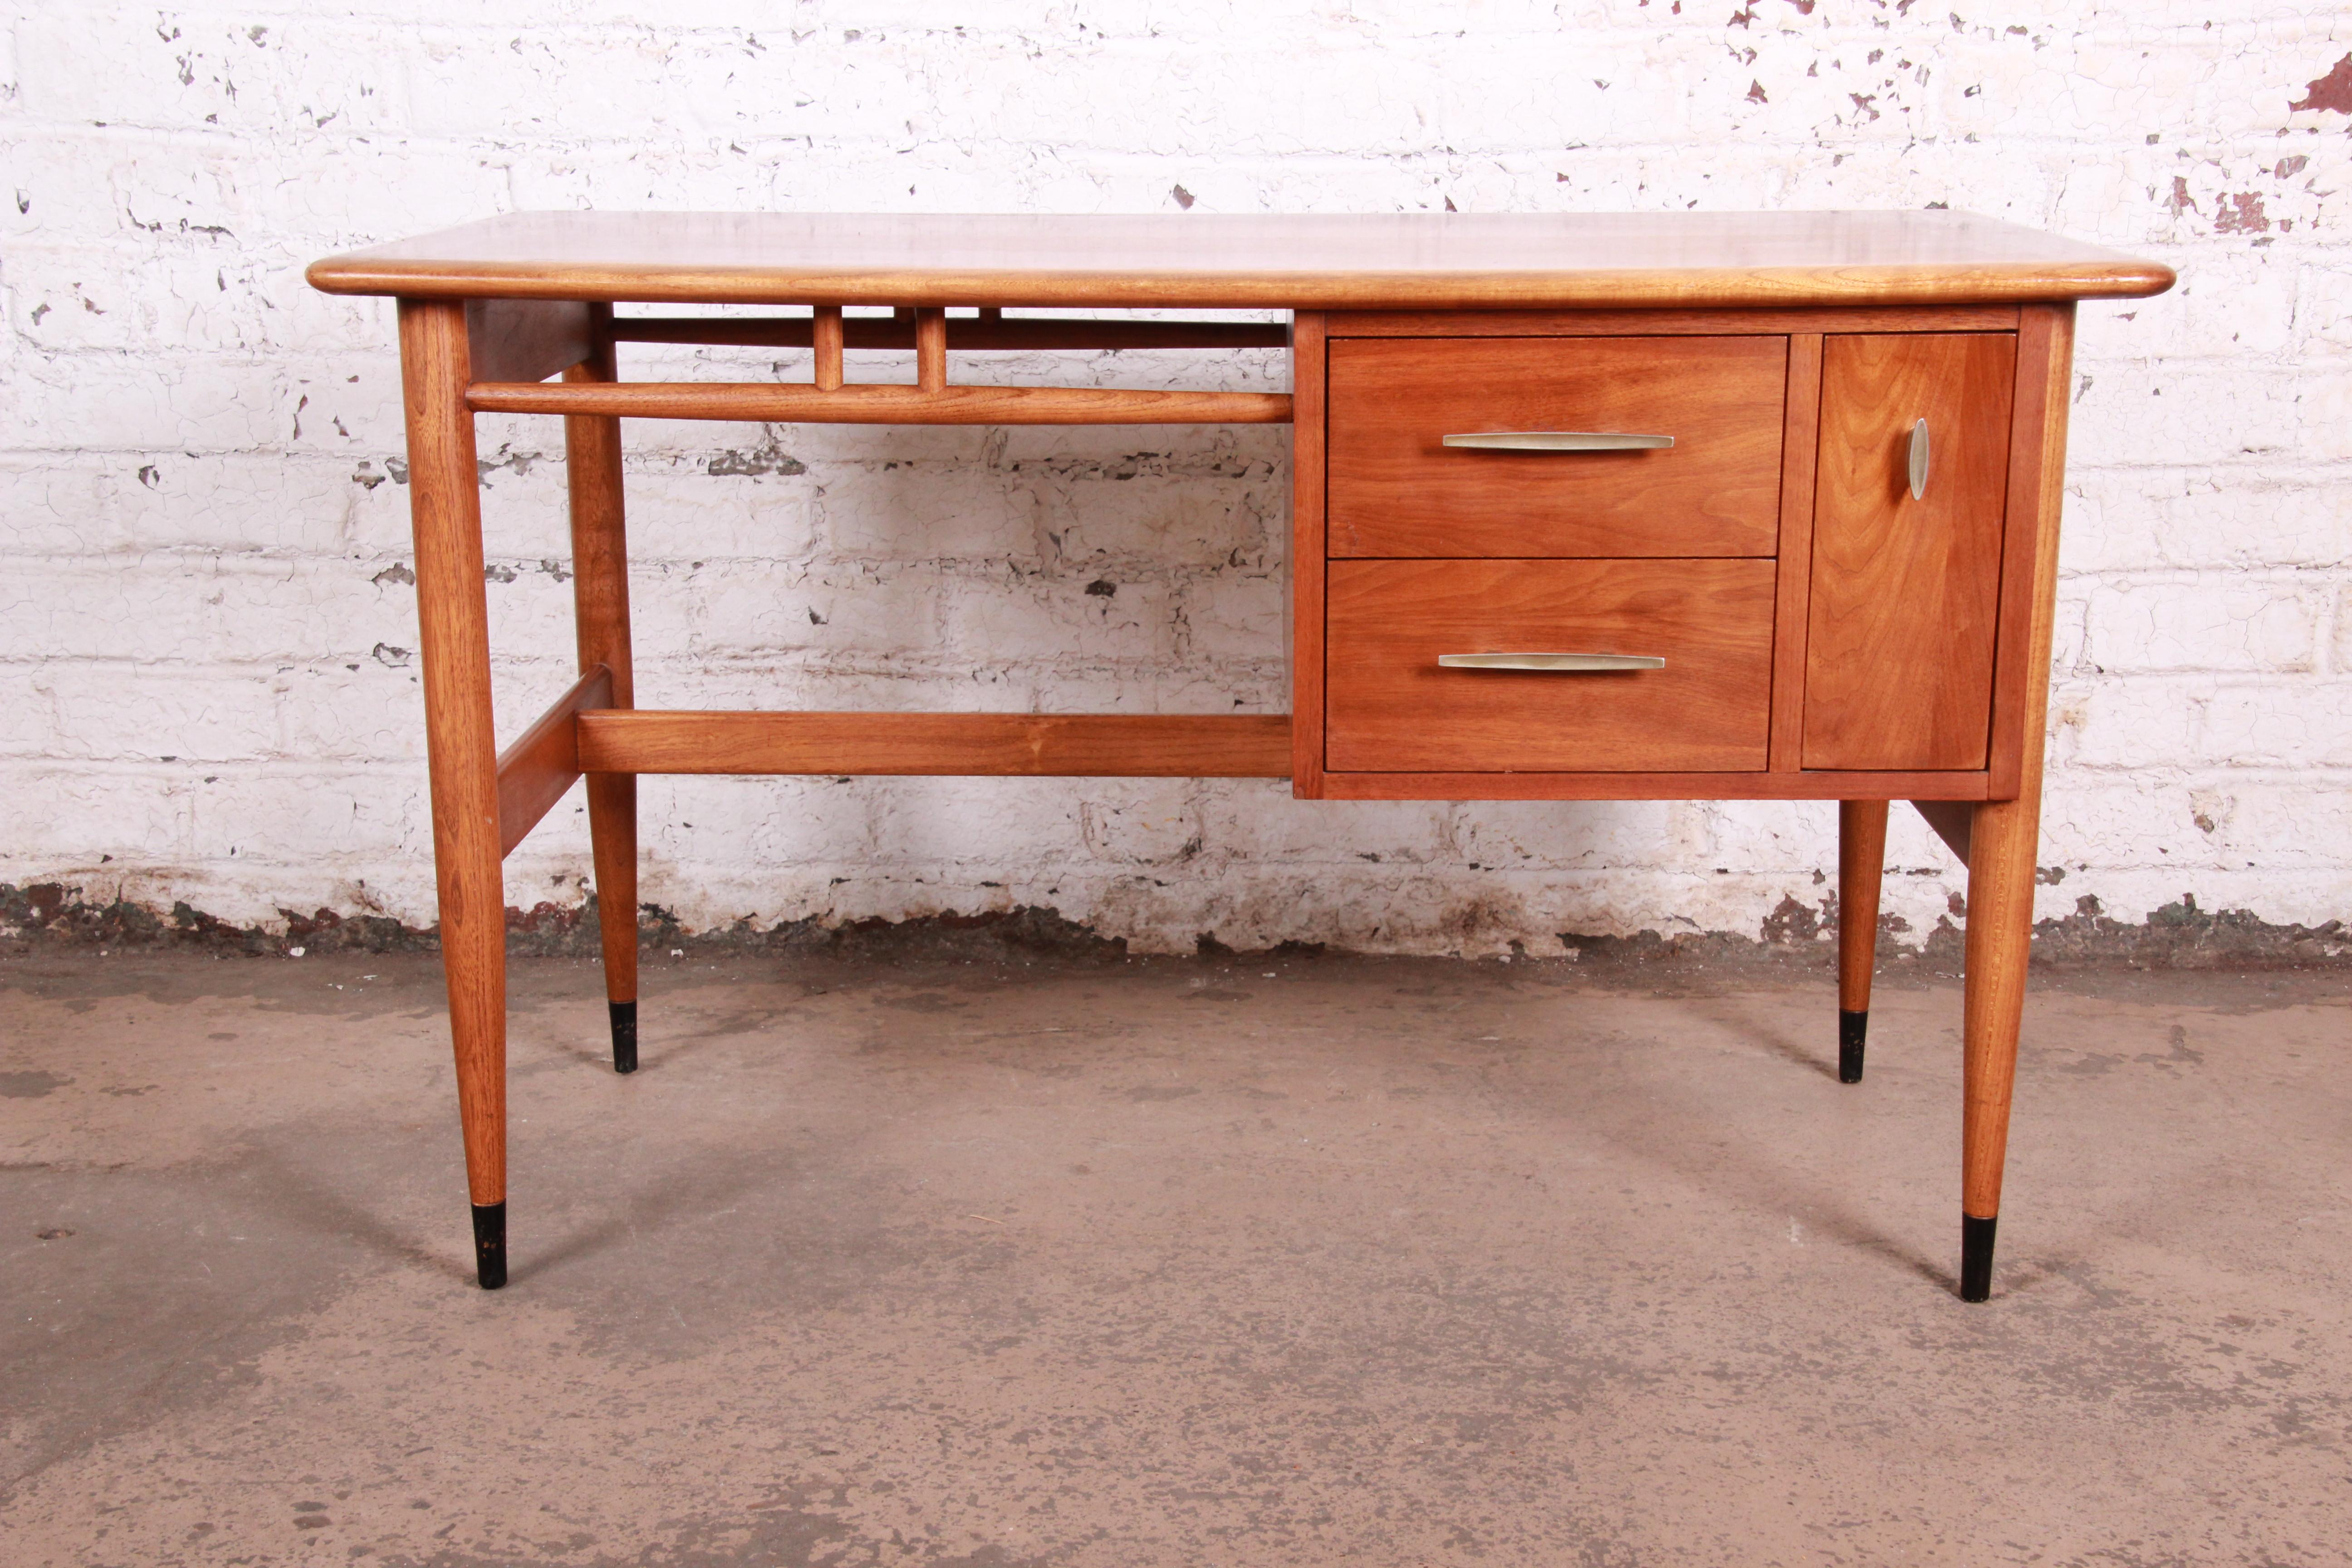 A stunning Mid-Century Modern desk from the acclaim line by Lane Furniture. The desk features gorgeous walnut wood grain with sculpted walnut legs and the iconic ash dovetails on top. It offers good storage, with three deep dovetailed drawers. The